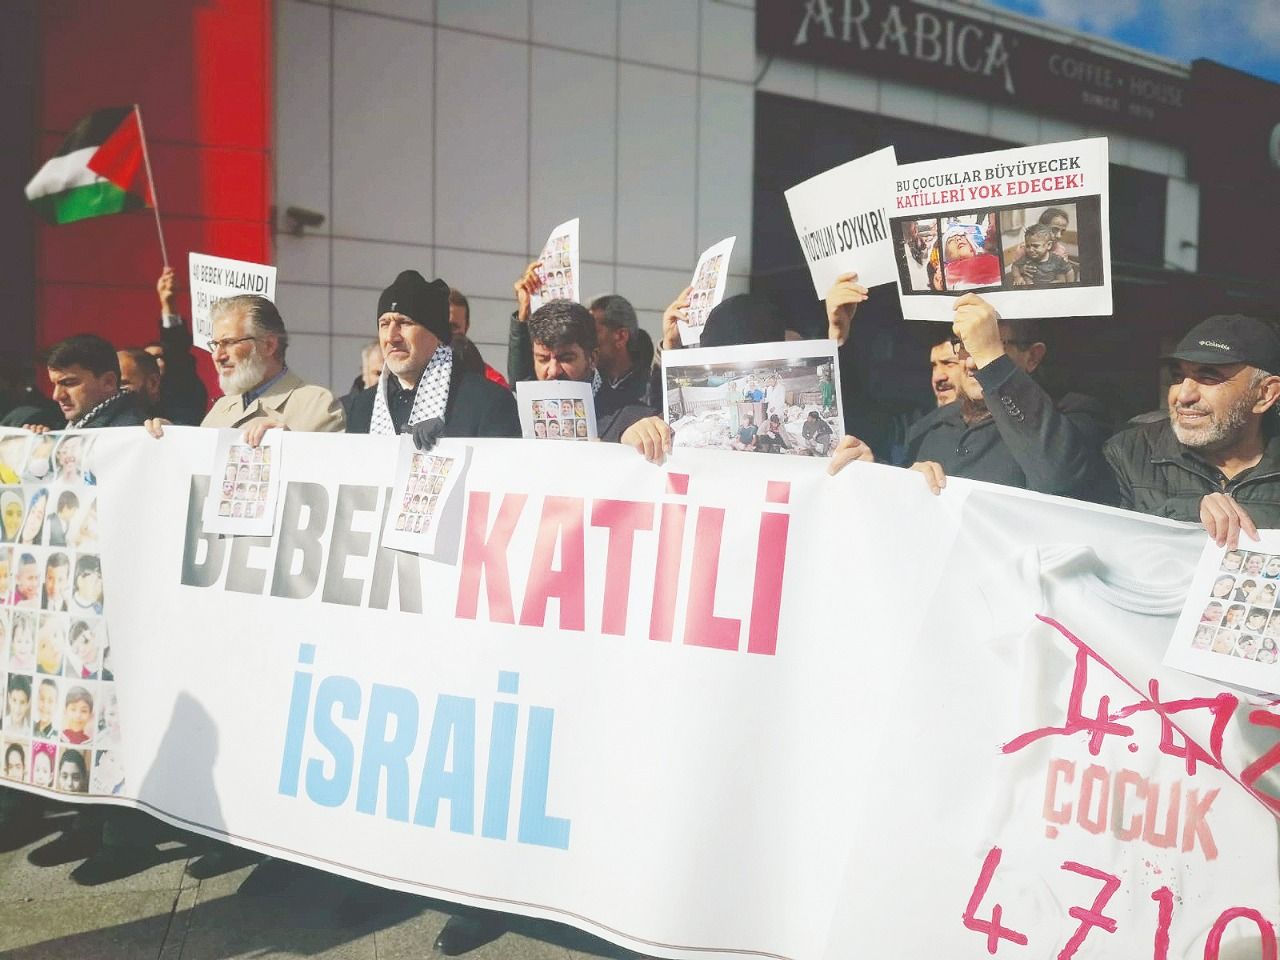 Protests held in front of UNICEF Ankara office for Gaza children